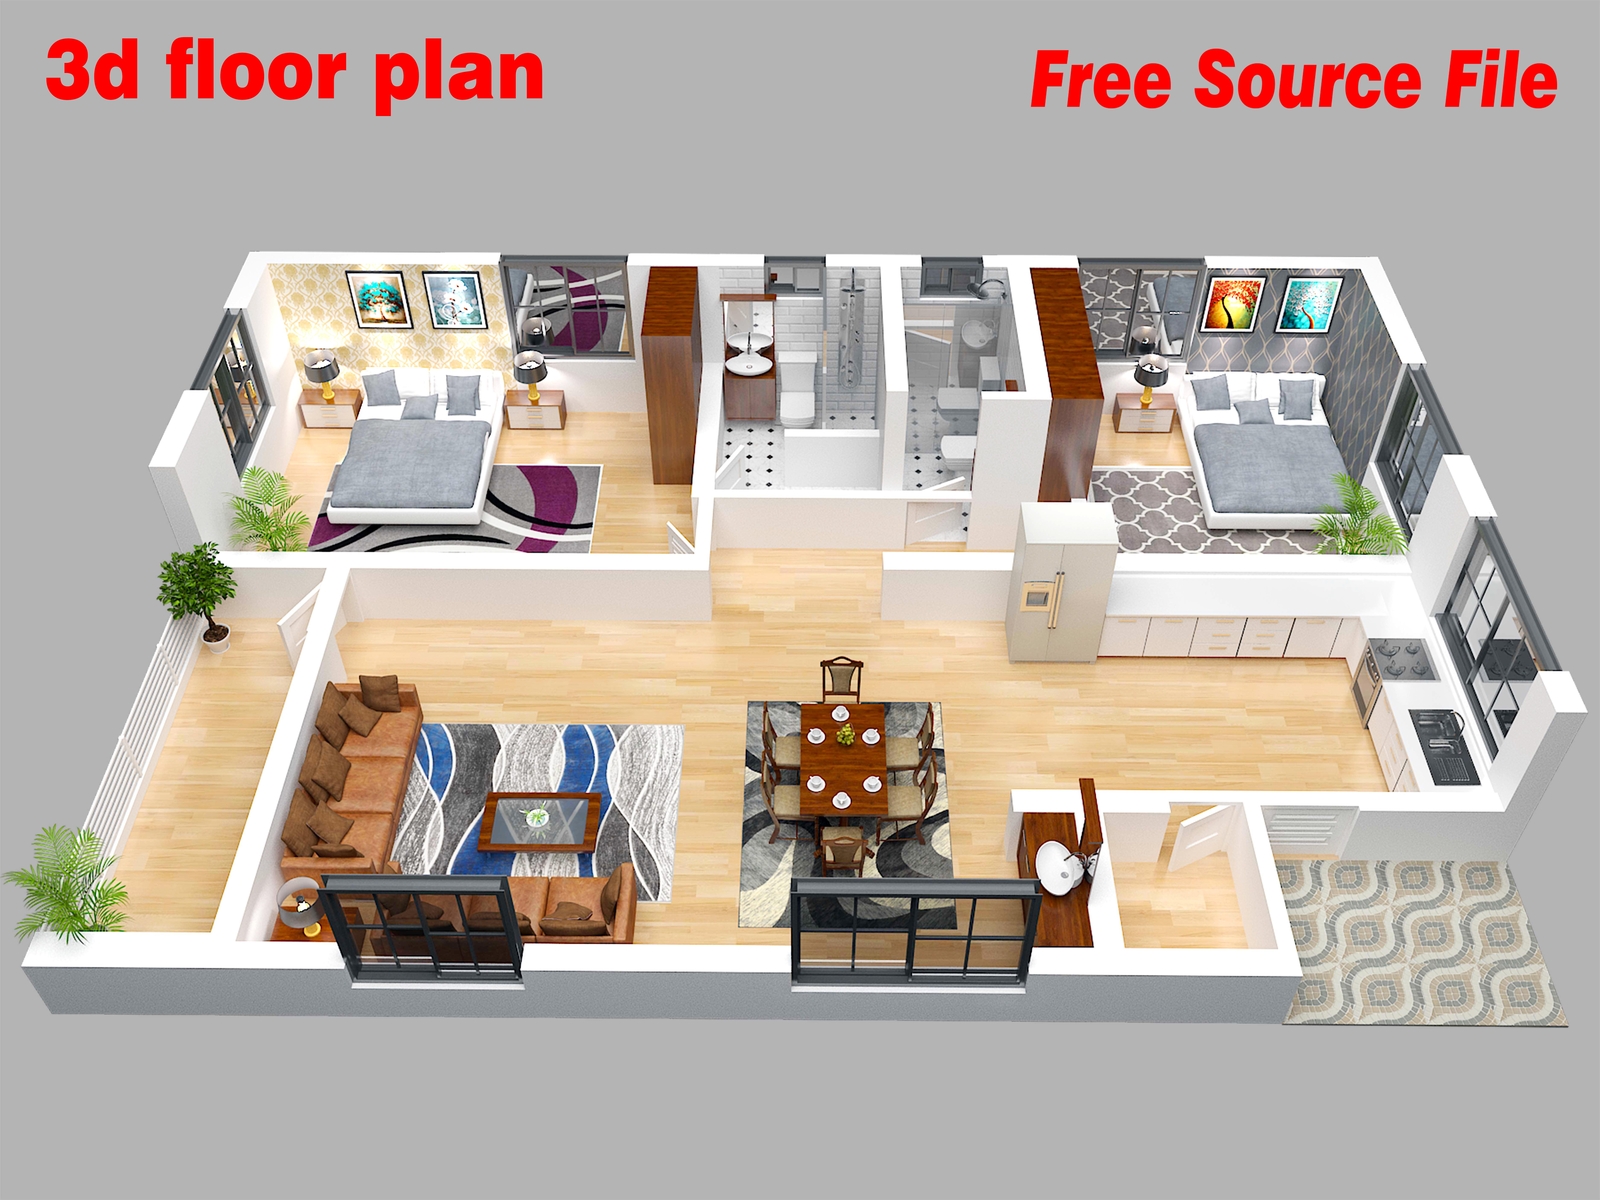 Influyente tenaz Pantano 3d floor plan interior by 3d max by Akib arch on Dribbble